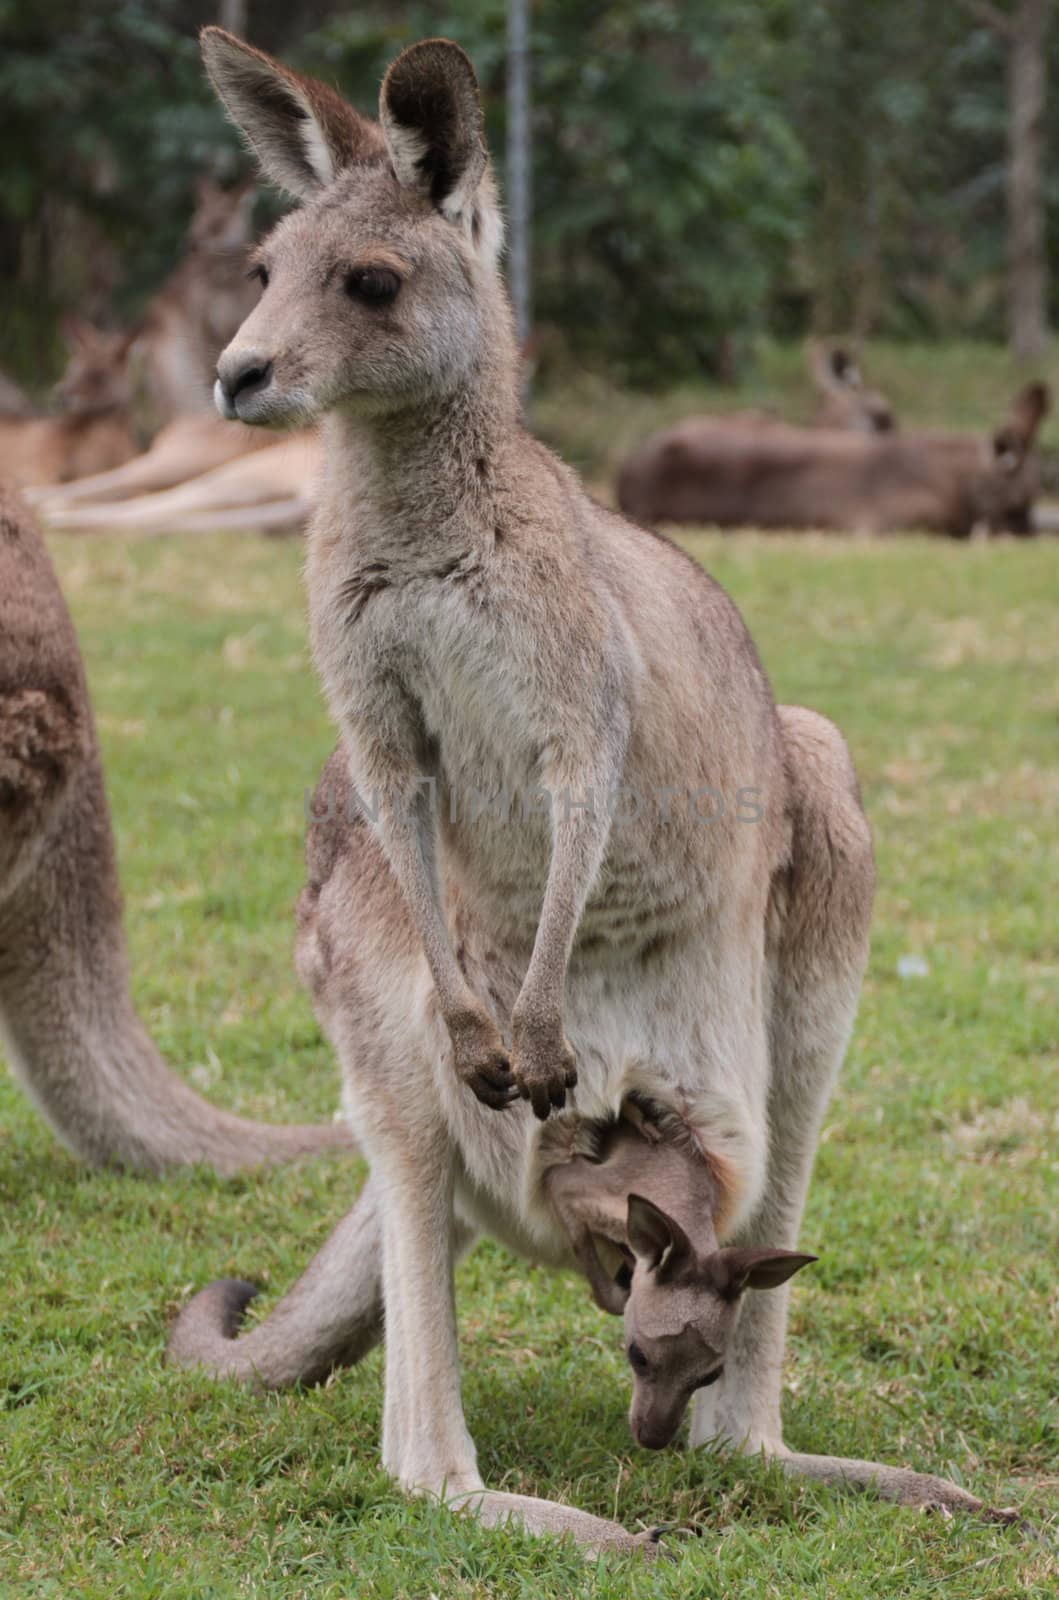 Mother Kangaroo with baby joey in pouch by KirbyWalkerPhotos